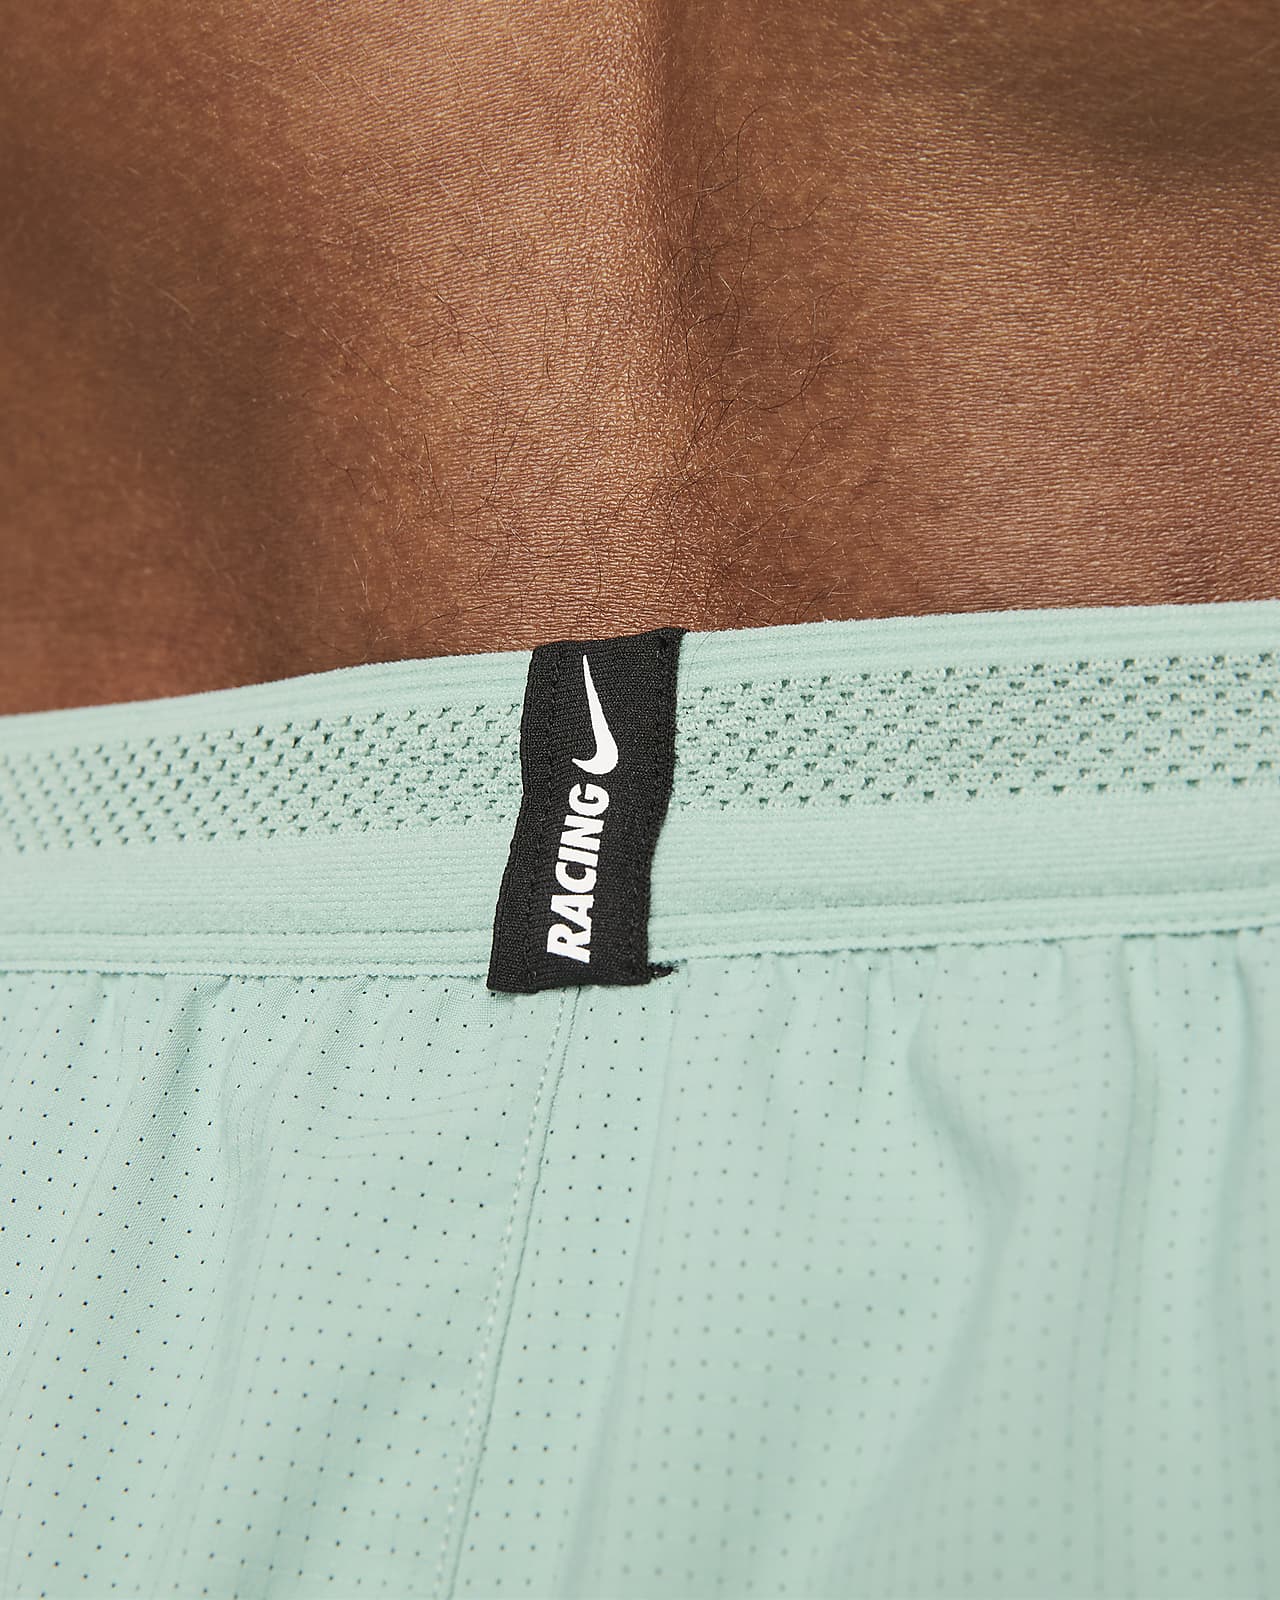 NIKE RUNNING AeroSwift Recycled Ripstop Shorts for Men